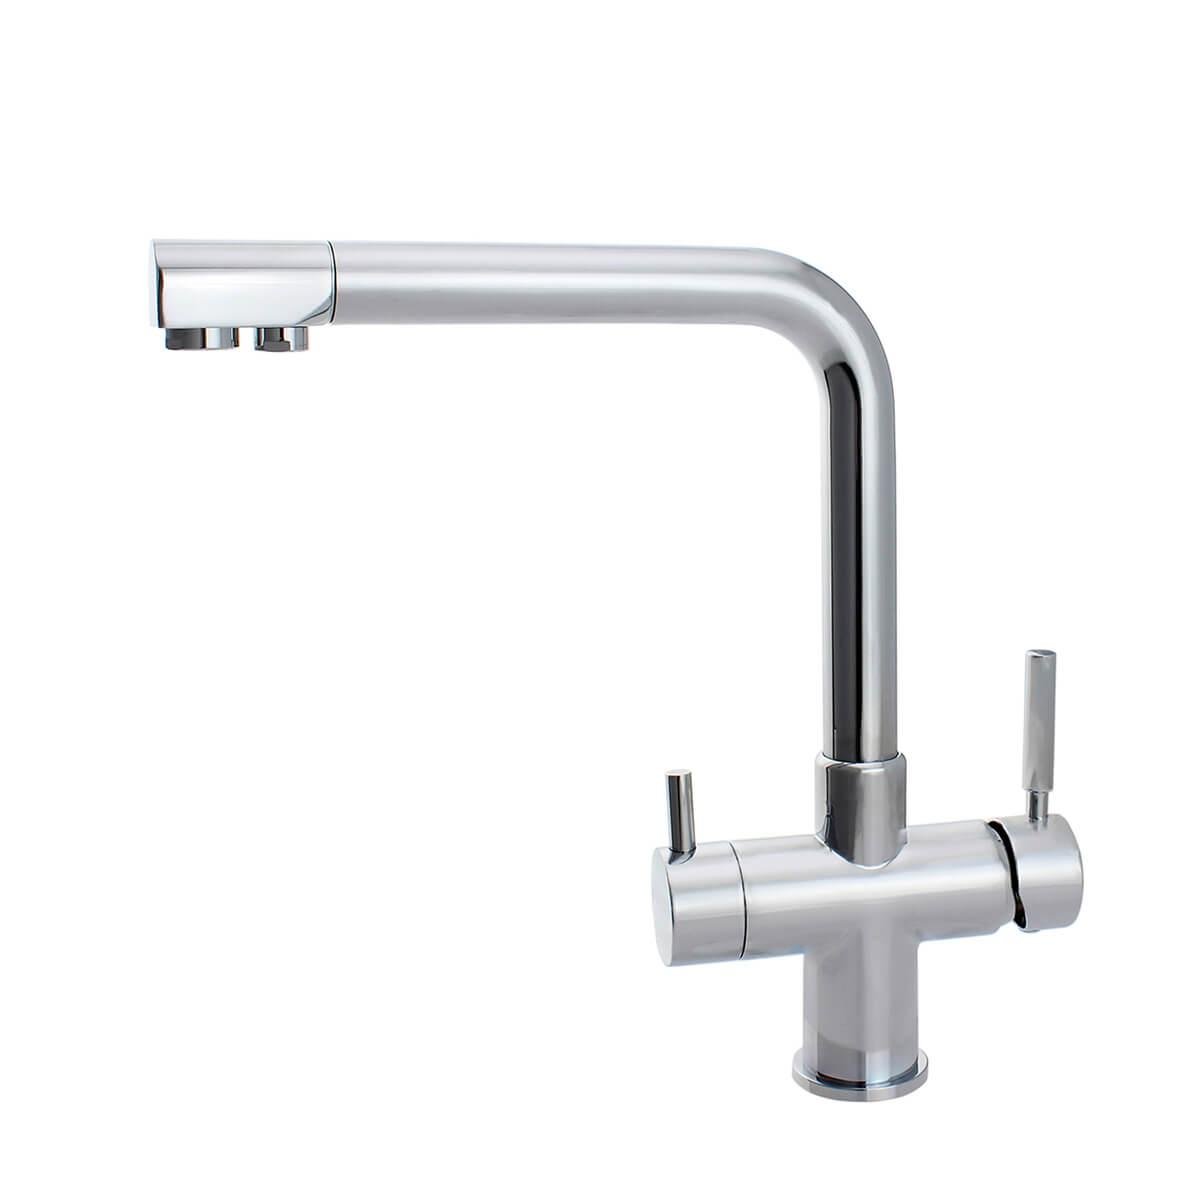 DOGO Tri Flow Kitchen Faucet 4 way faucet for kitchen hot&cold water kitchen fau 2